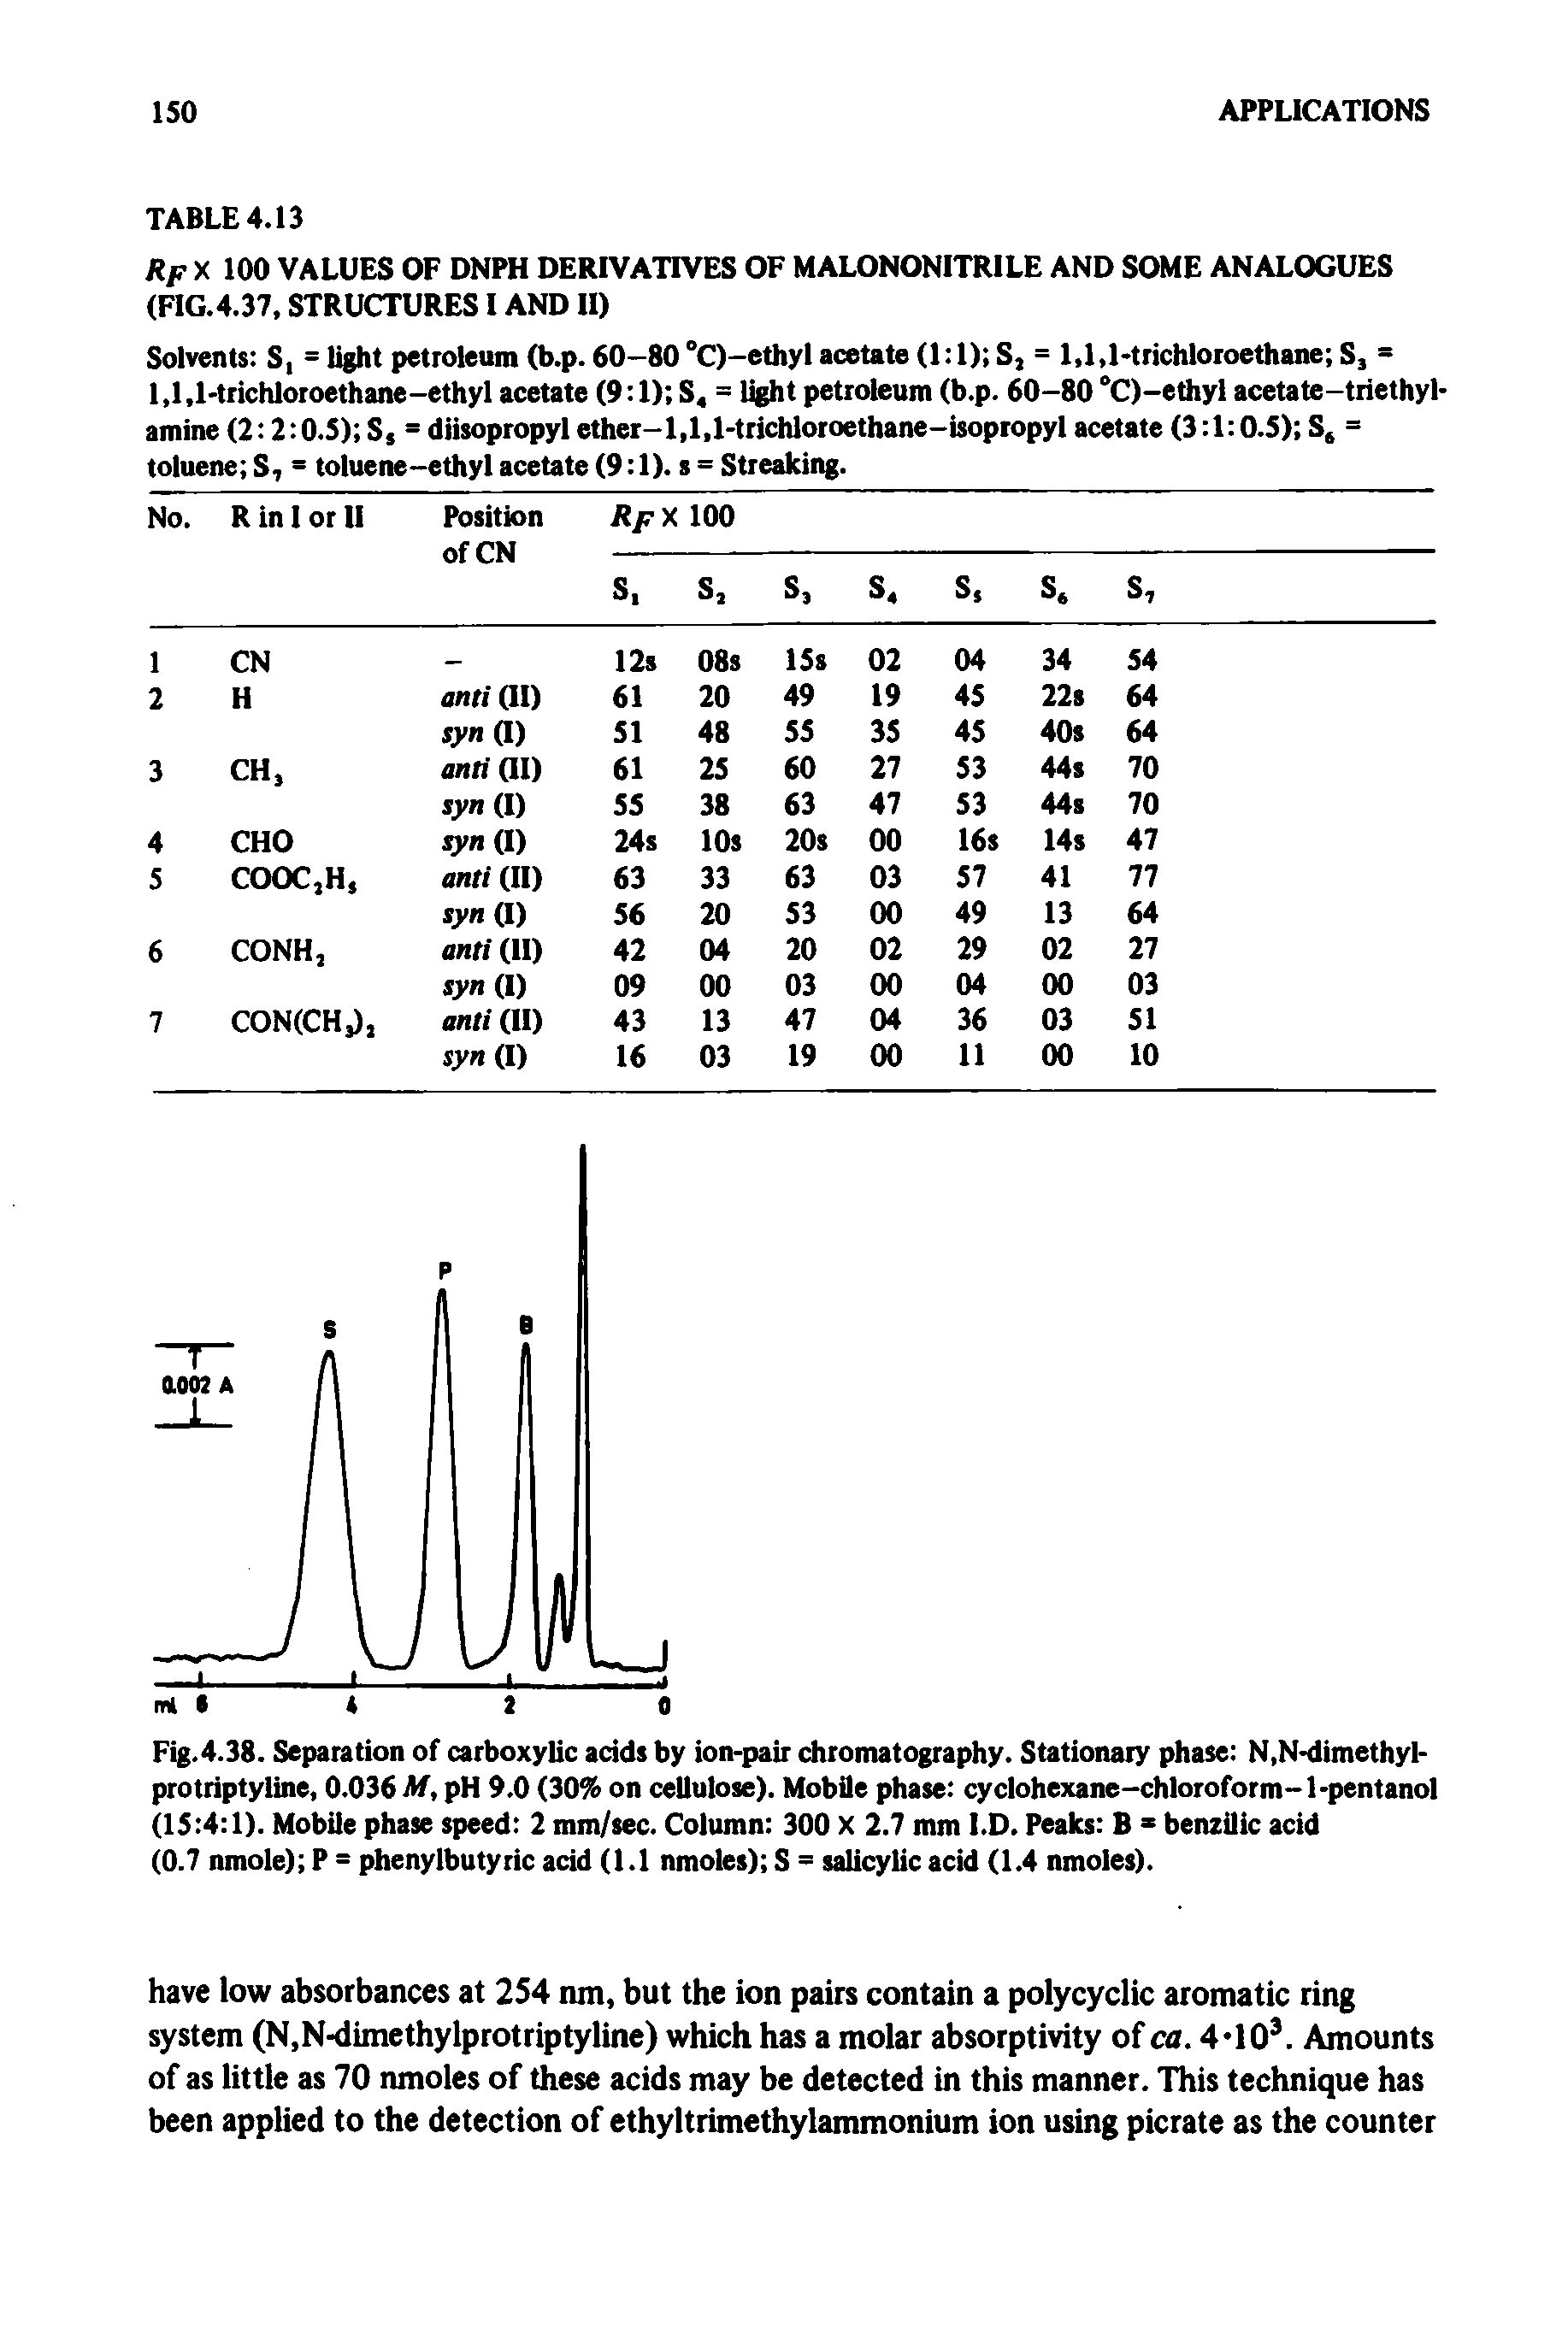 Fig.4.38. Separation of carboxylic acids by ion-pair chromatography. Stationary phase N,N-dimethyl-protriptyline, 0.036 M, pH 9.0 (30% on cellulose). Mobile phase cyclohexane-chloroform-1-pentanol (15 4 1). Mobile phase speed 2 mm/sec. Column 300 X 2.7 mm I.D. Peaks B benzilic acid (0.7 nmole) P = phenylbutyric acid (1.1 nmoles) S = salicylic acid (1.4 nmoles).